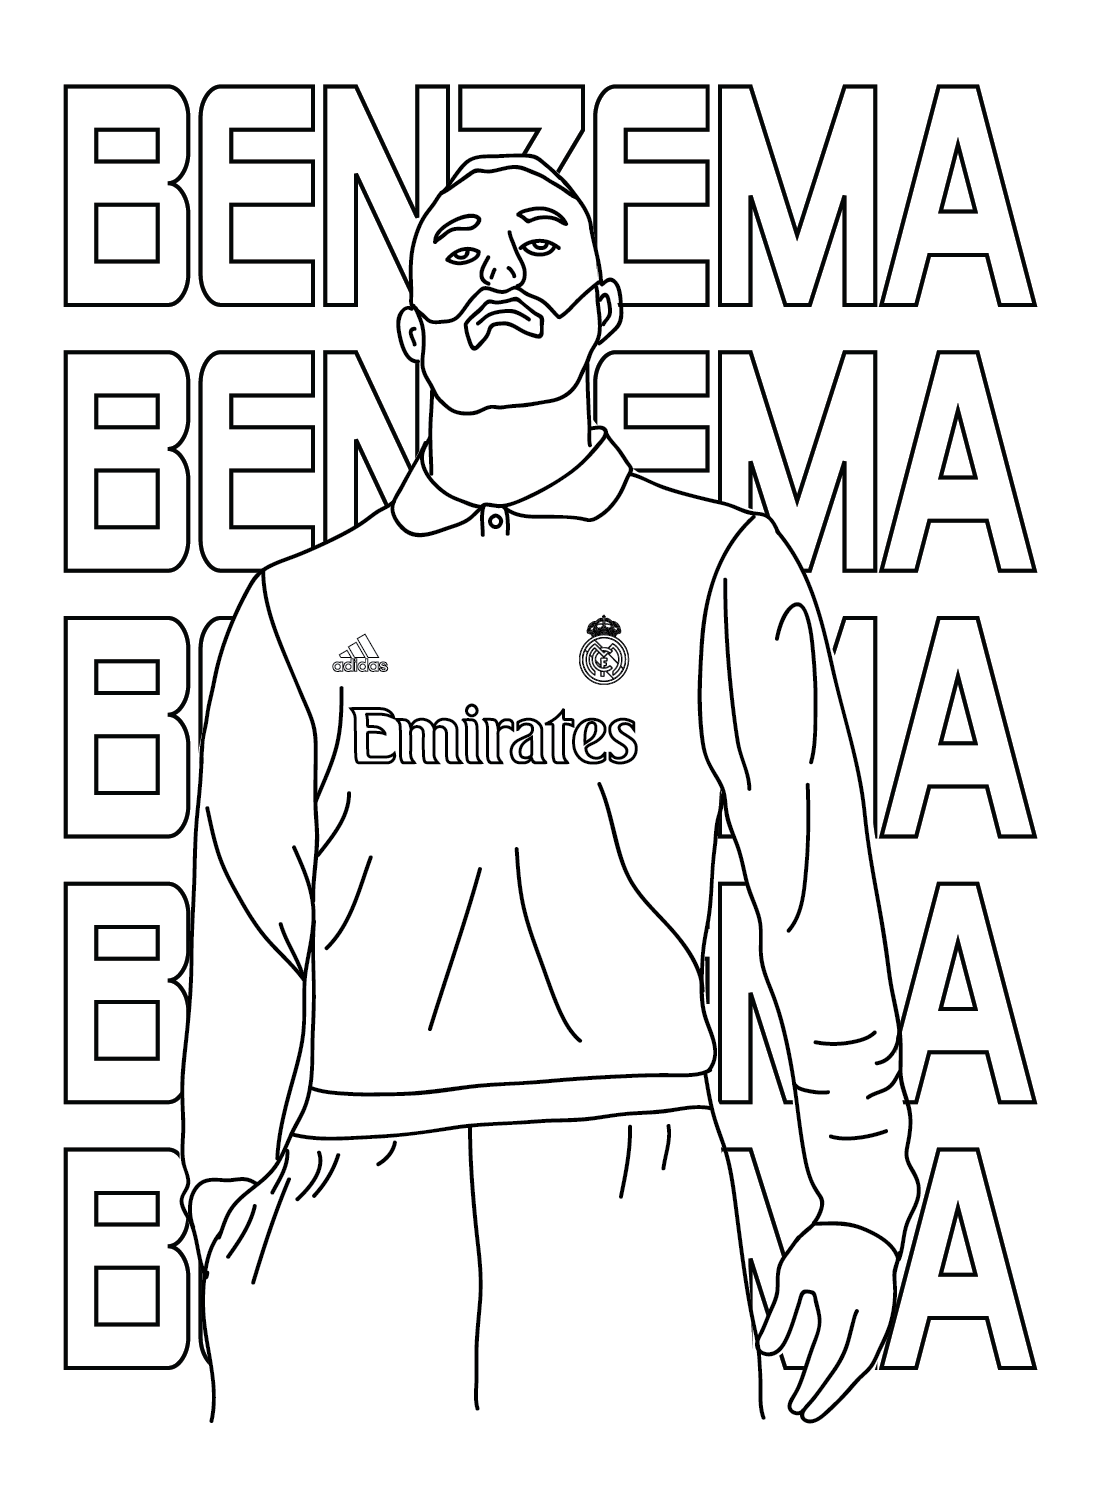 Young Player Karim Benzema Coloring Page